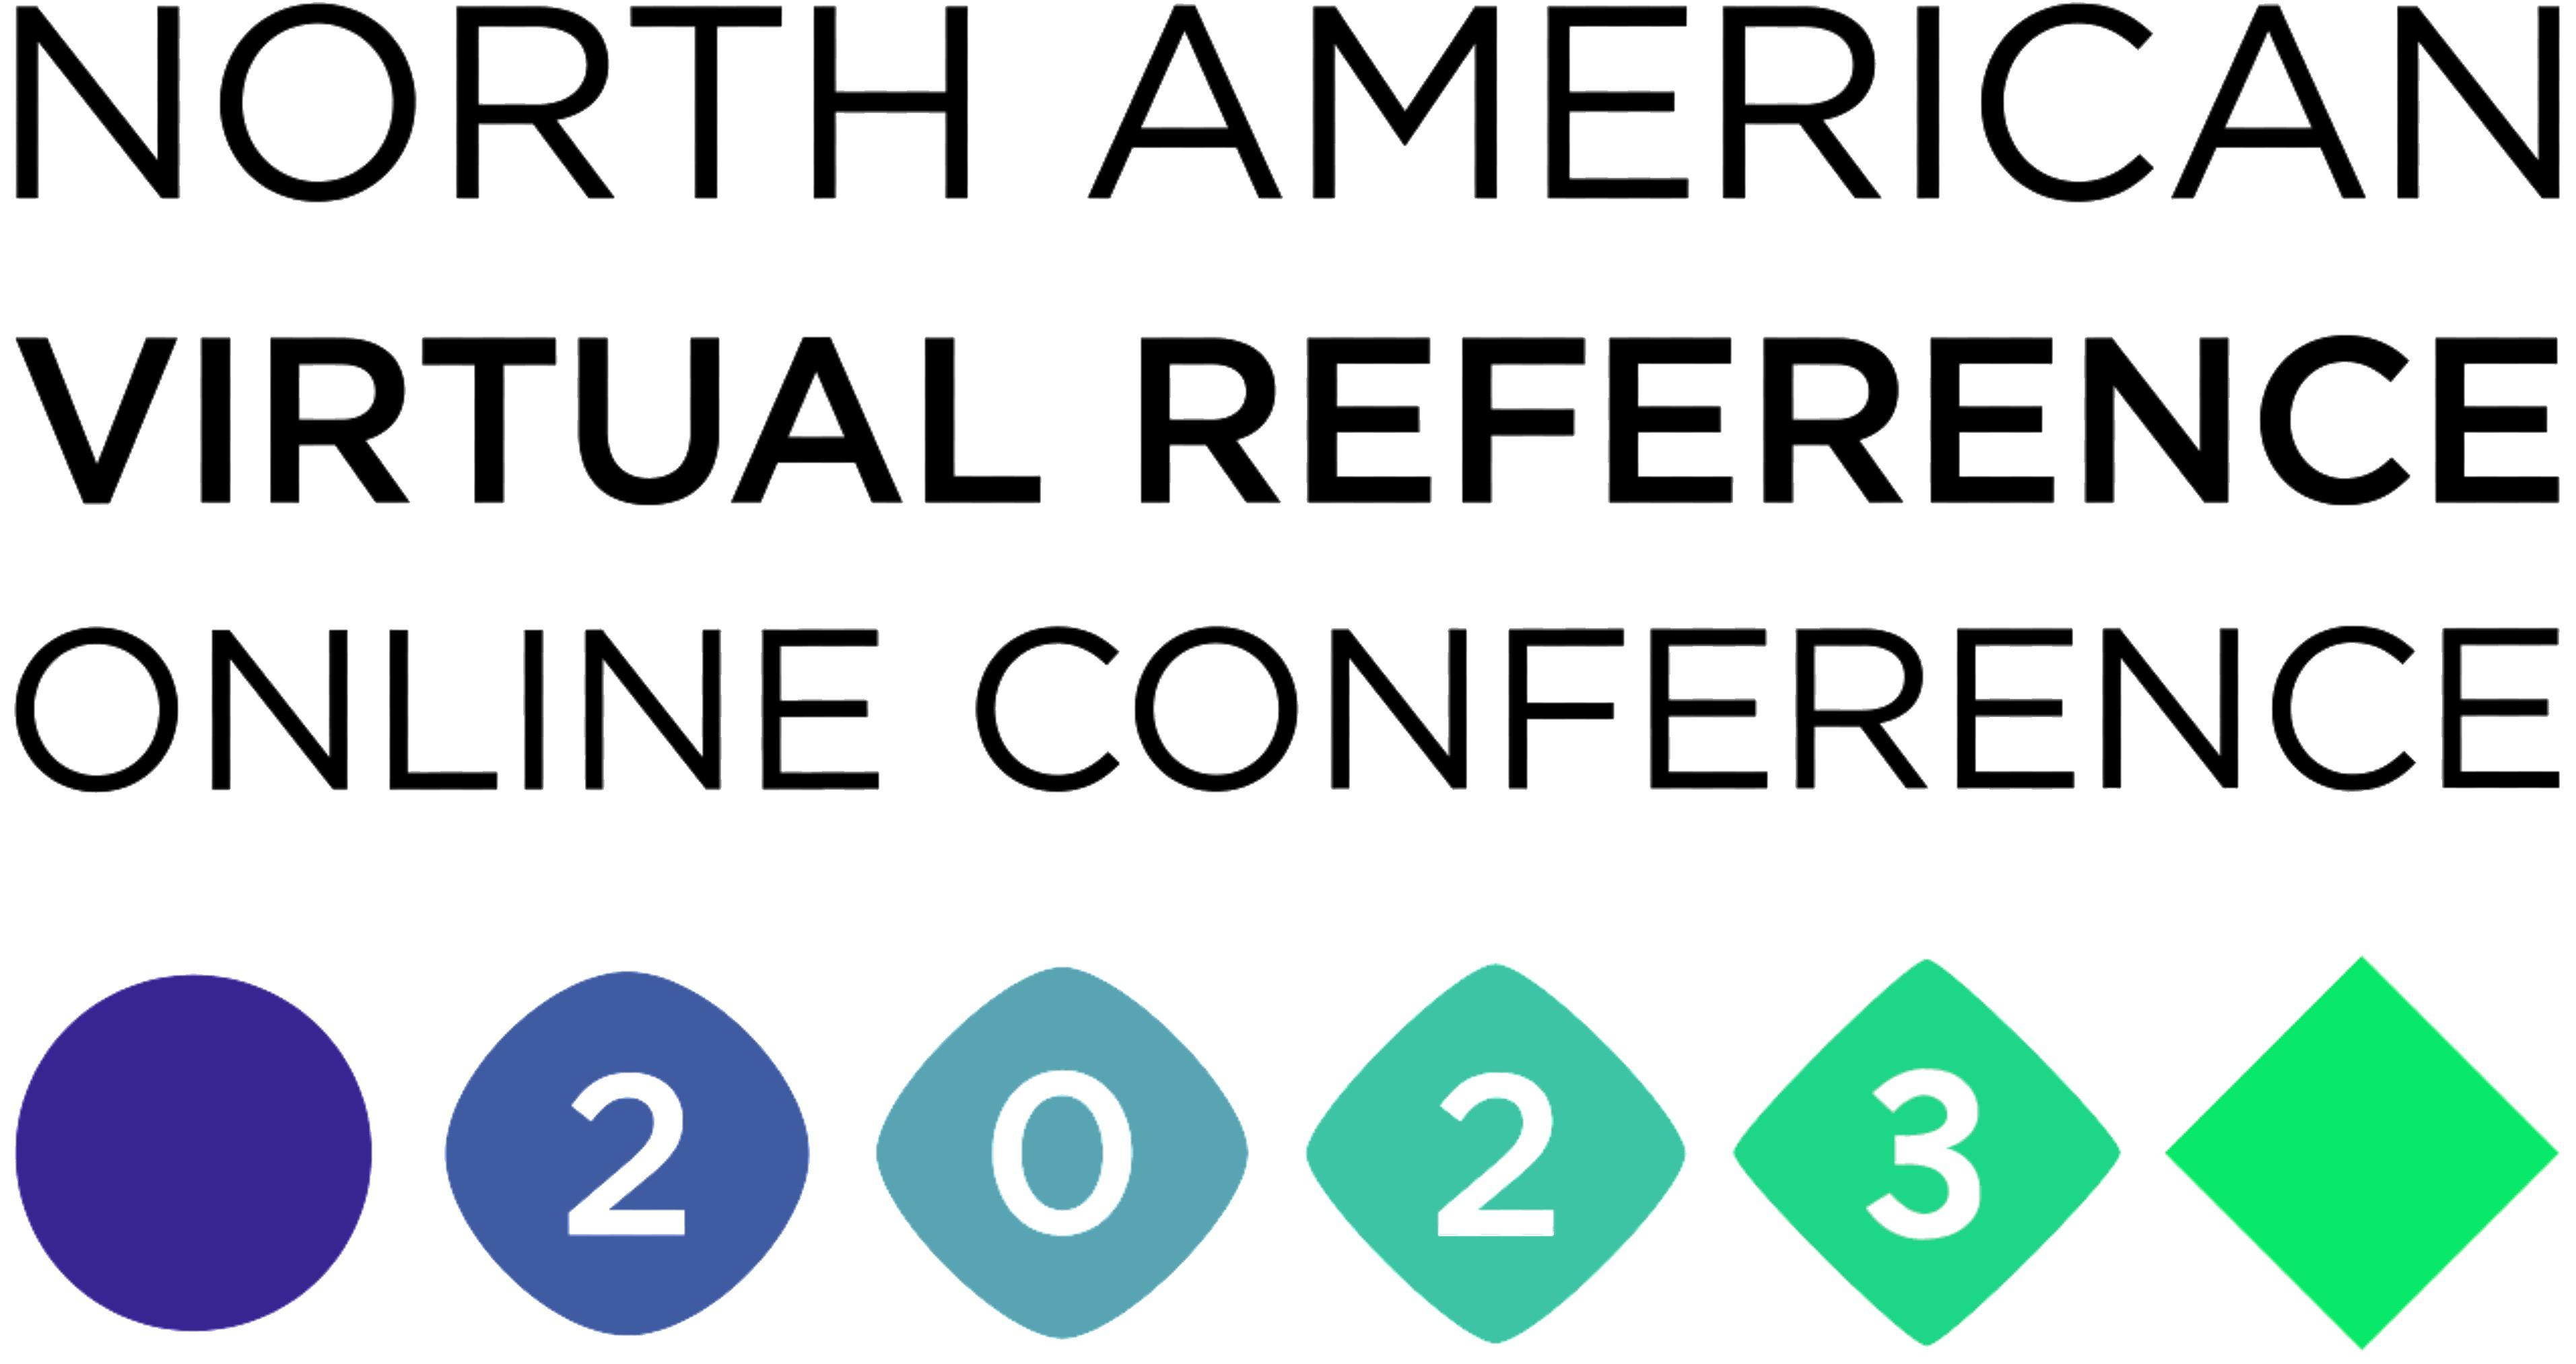 North American Virtual Reference Online Conference